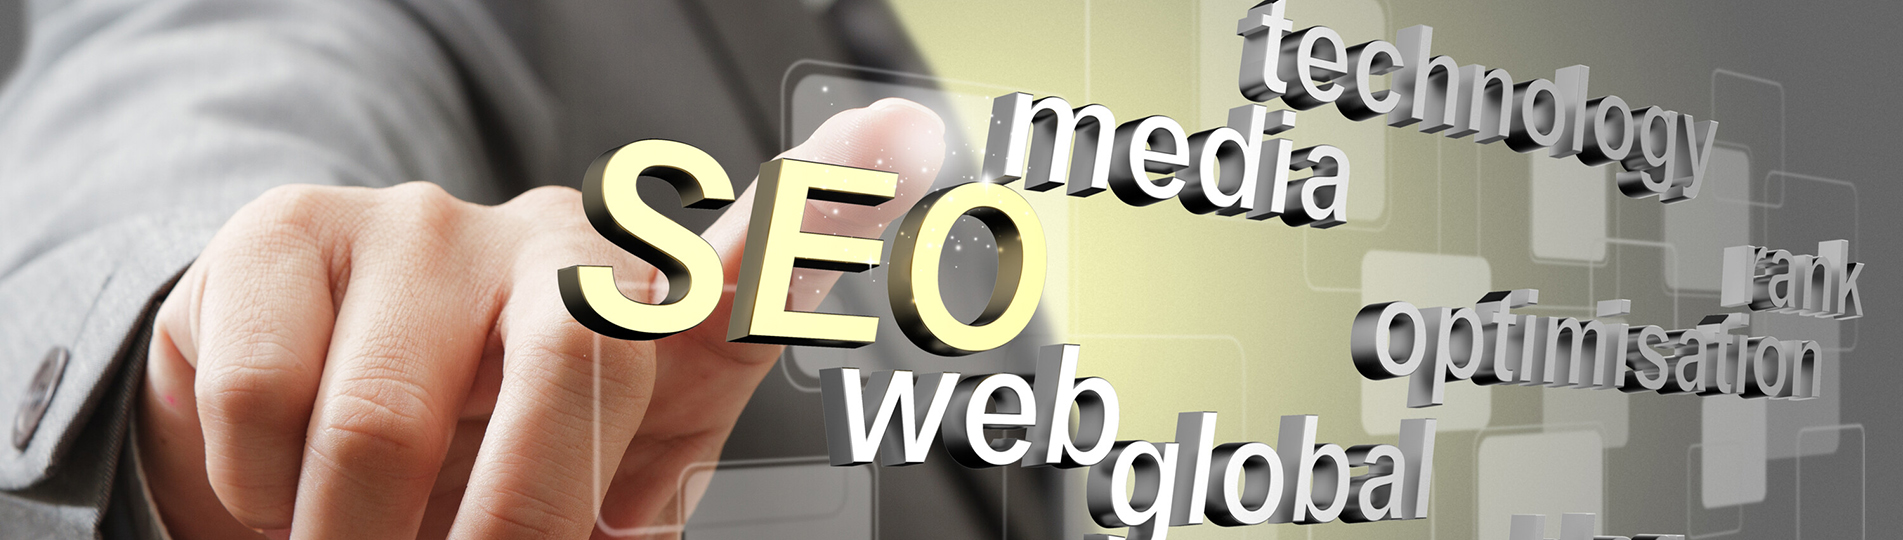 Agencies SEO Services Global Market to reach $83.7 billion in 2025